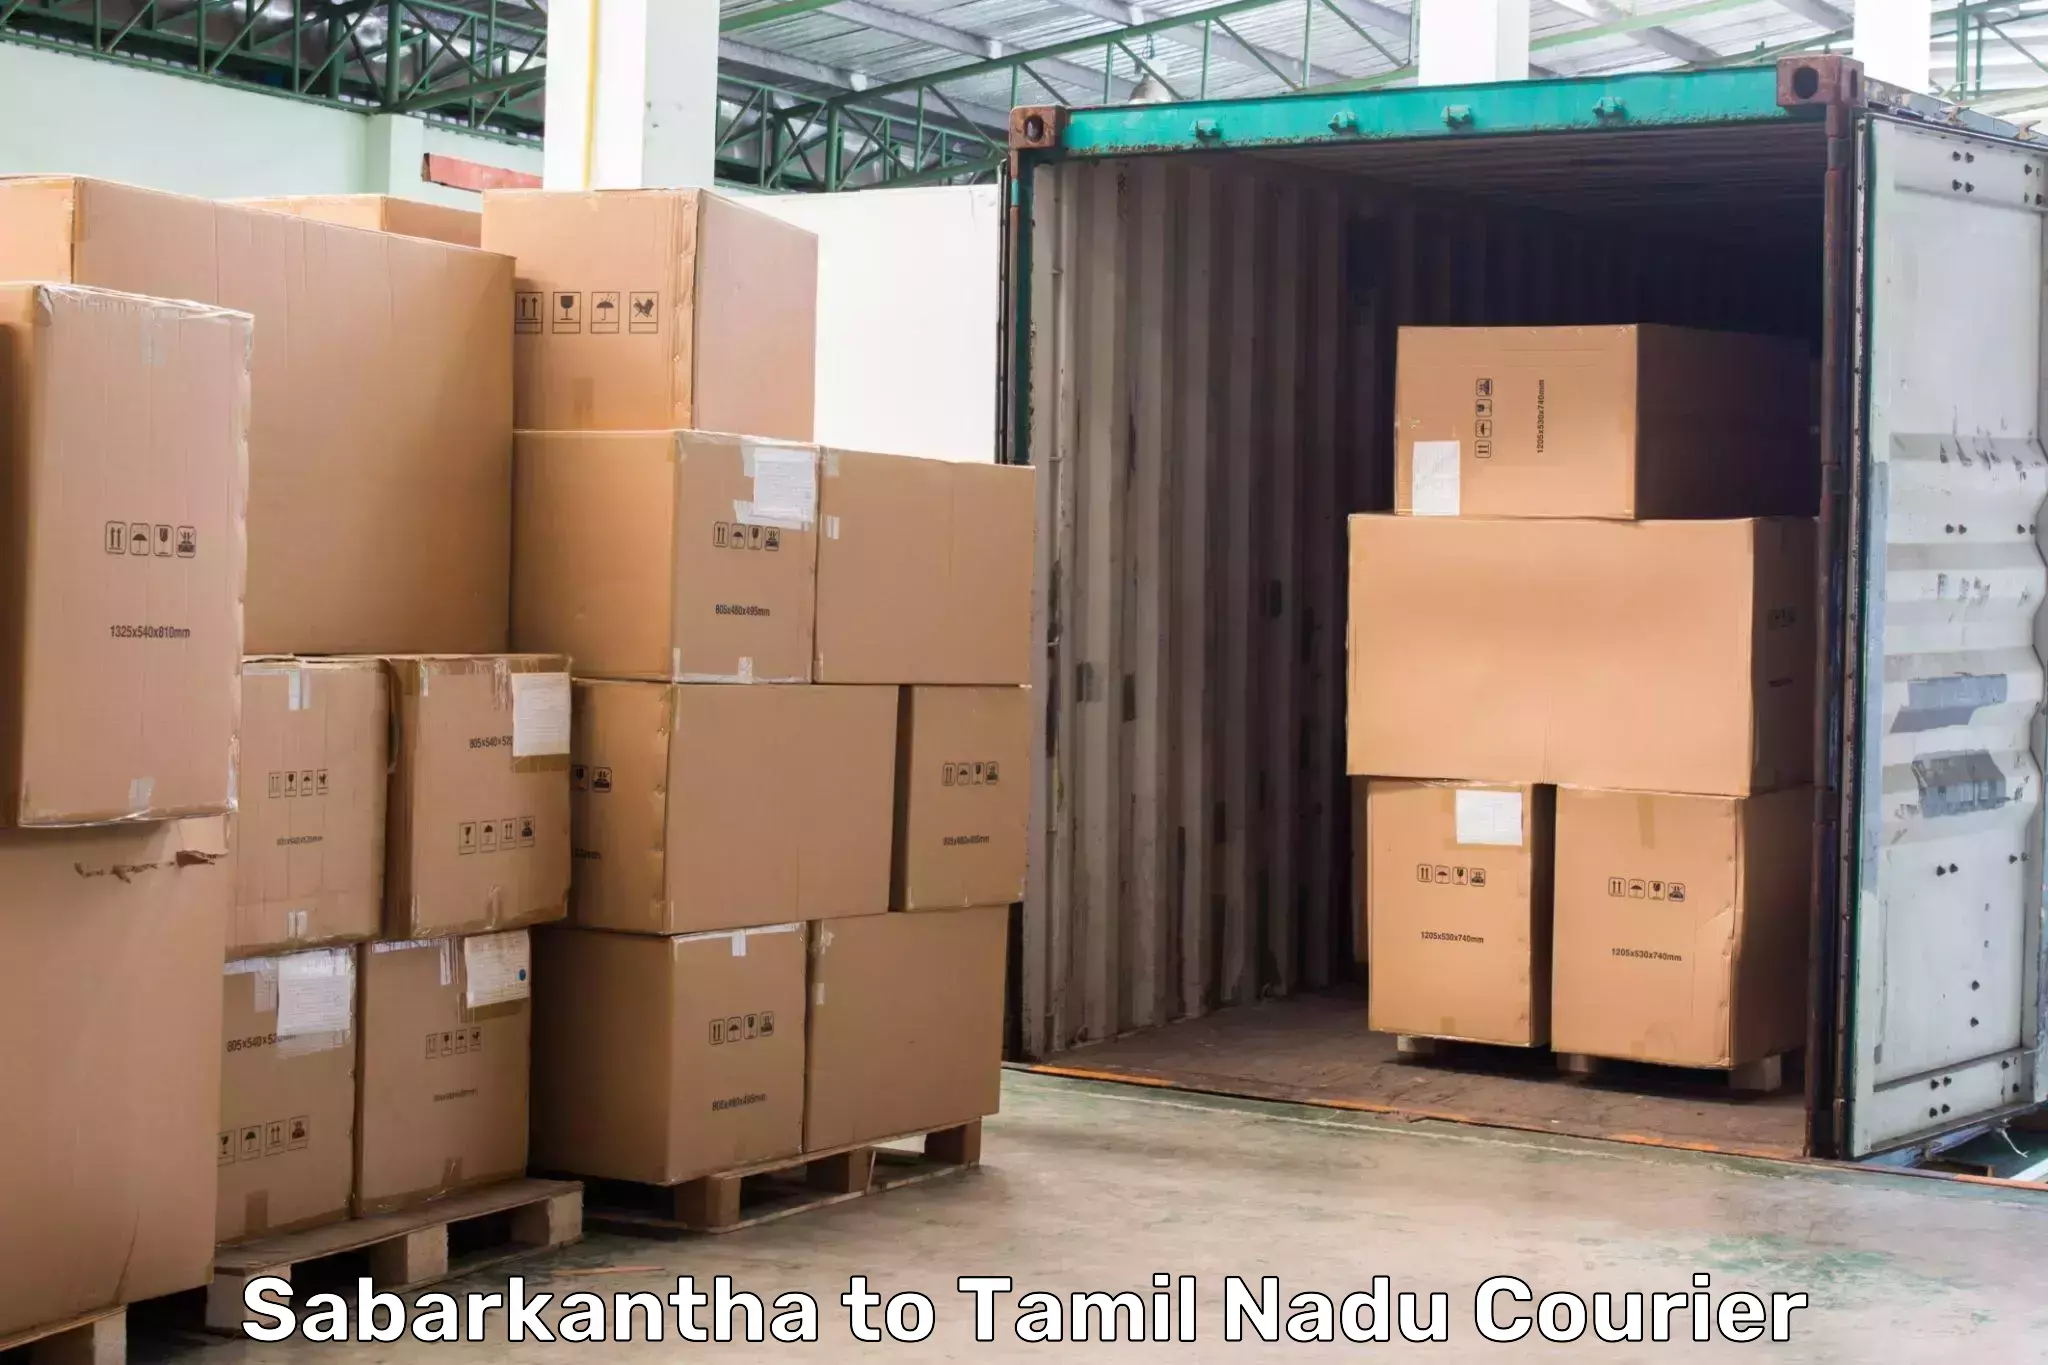 High-priority parcel service Sabarkantha to Ennore Port Chennai